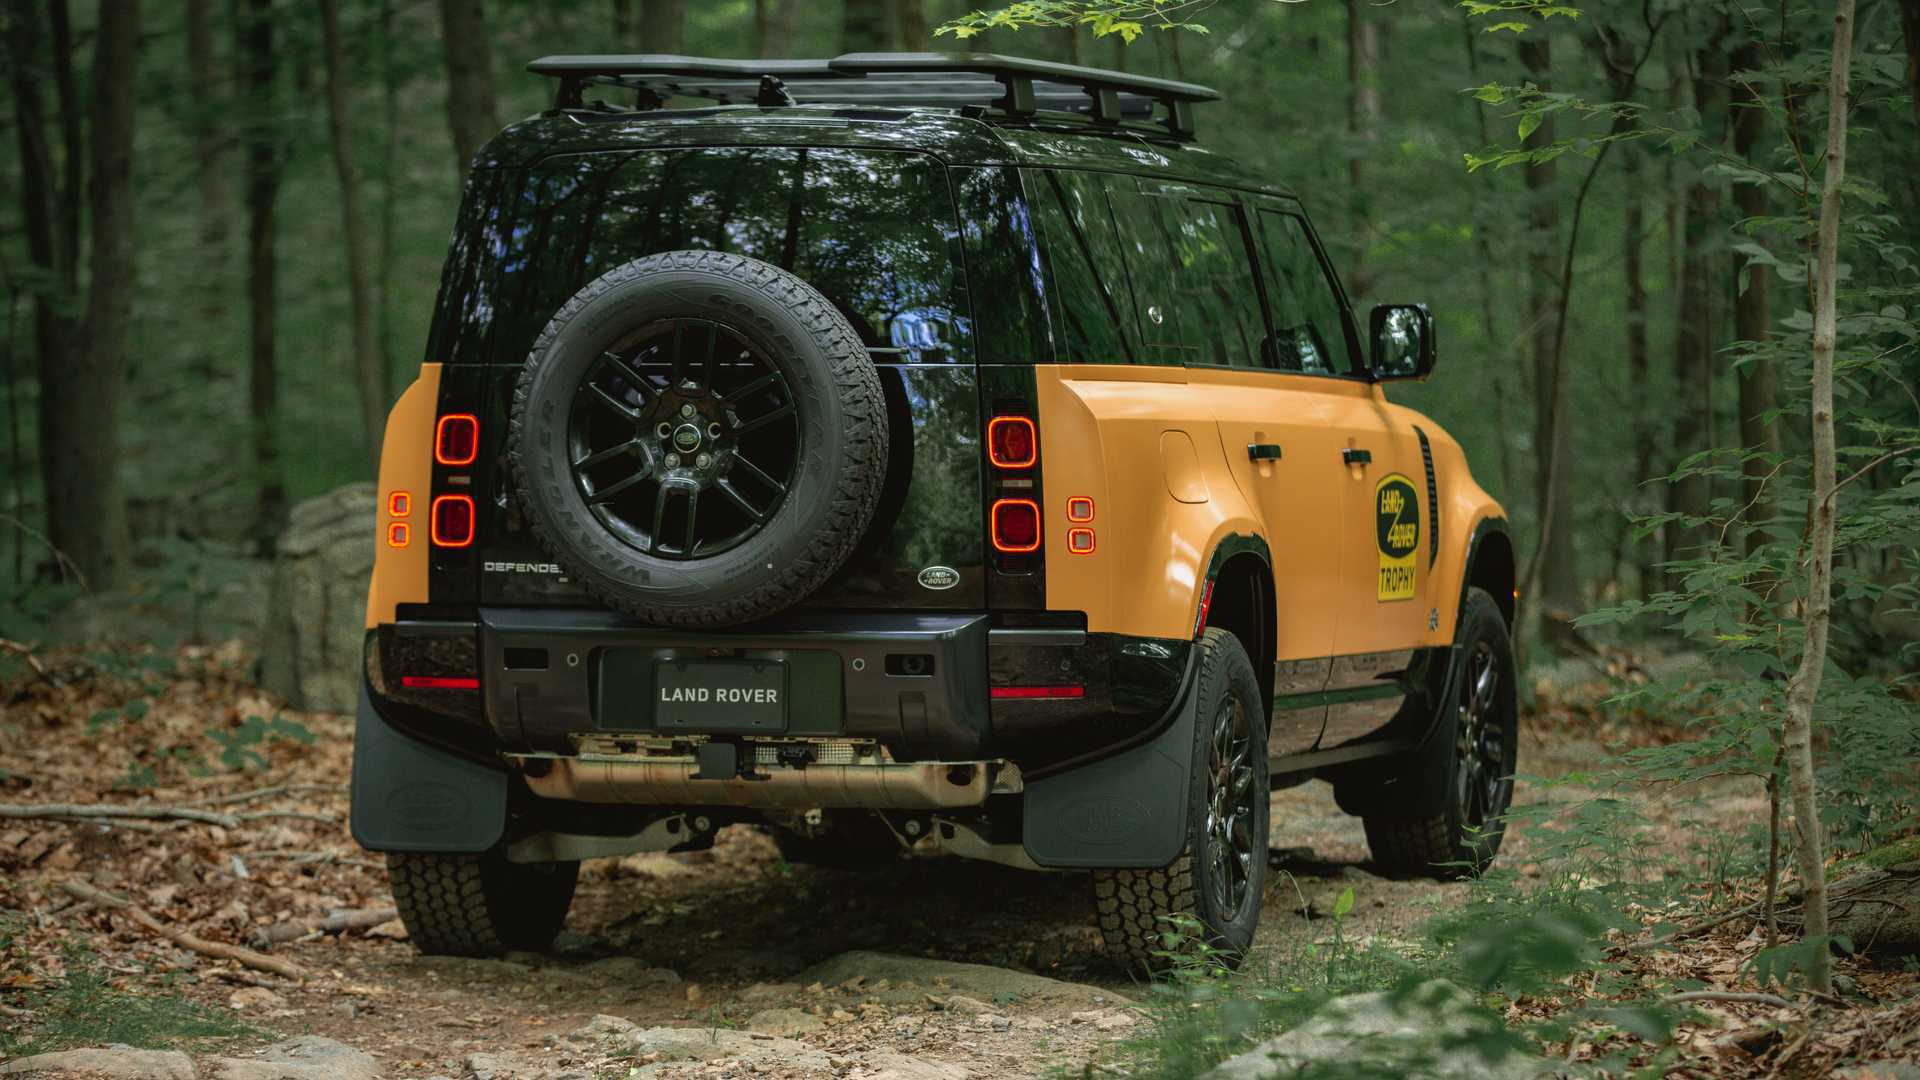 land-rover-defender-trophy-edition-rear-angle.jpg